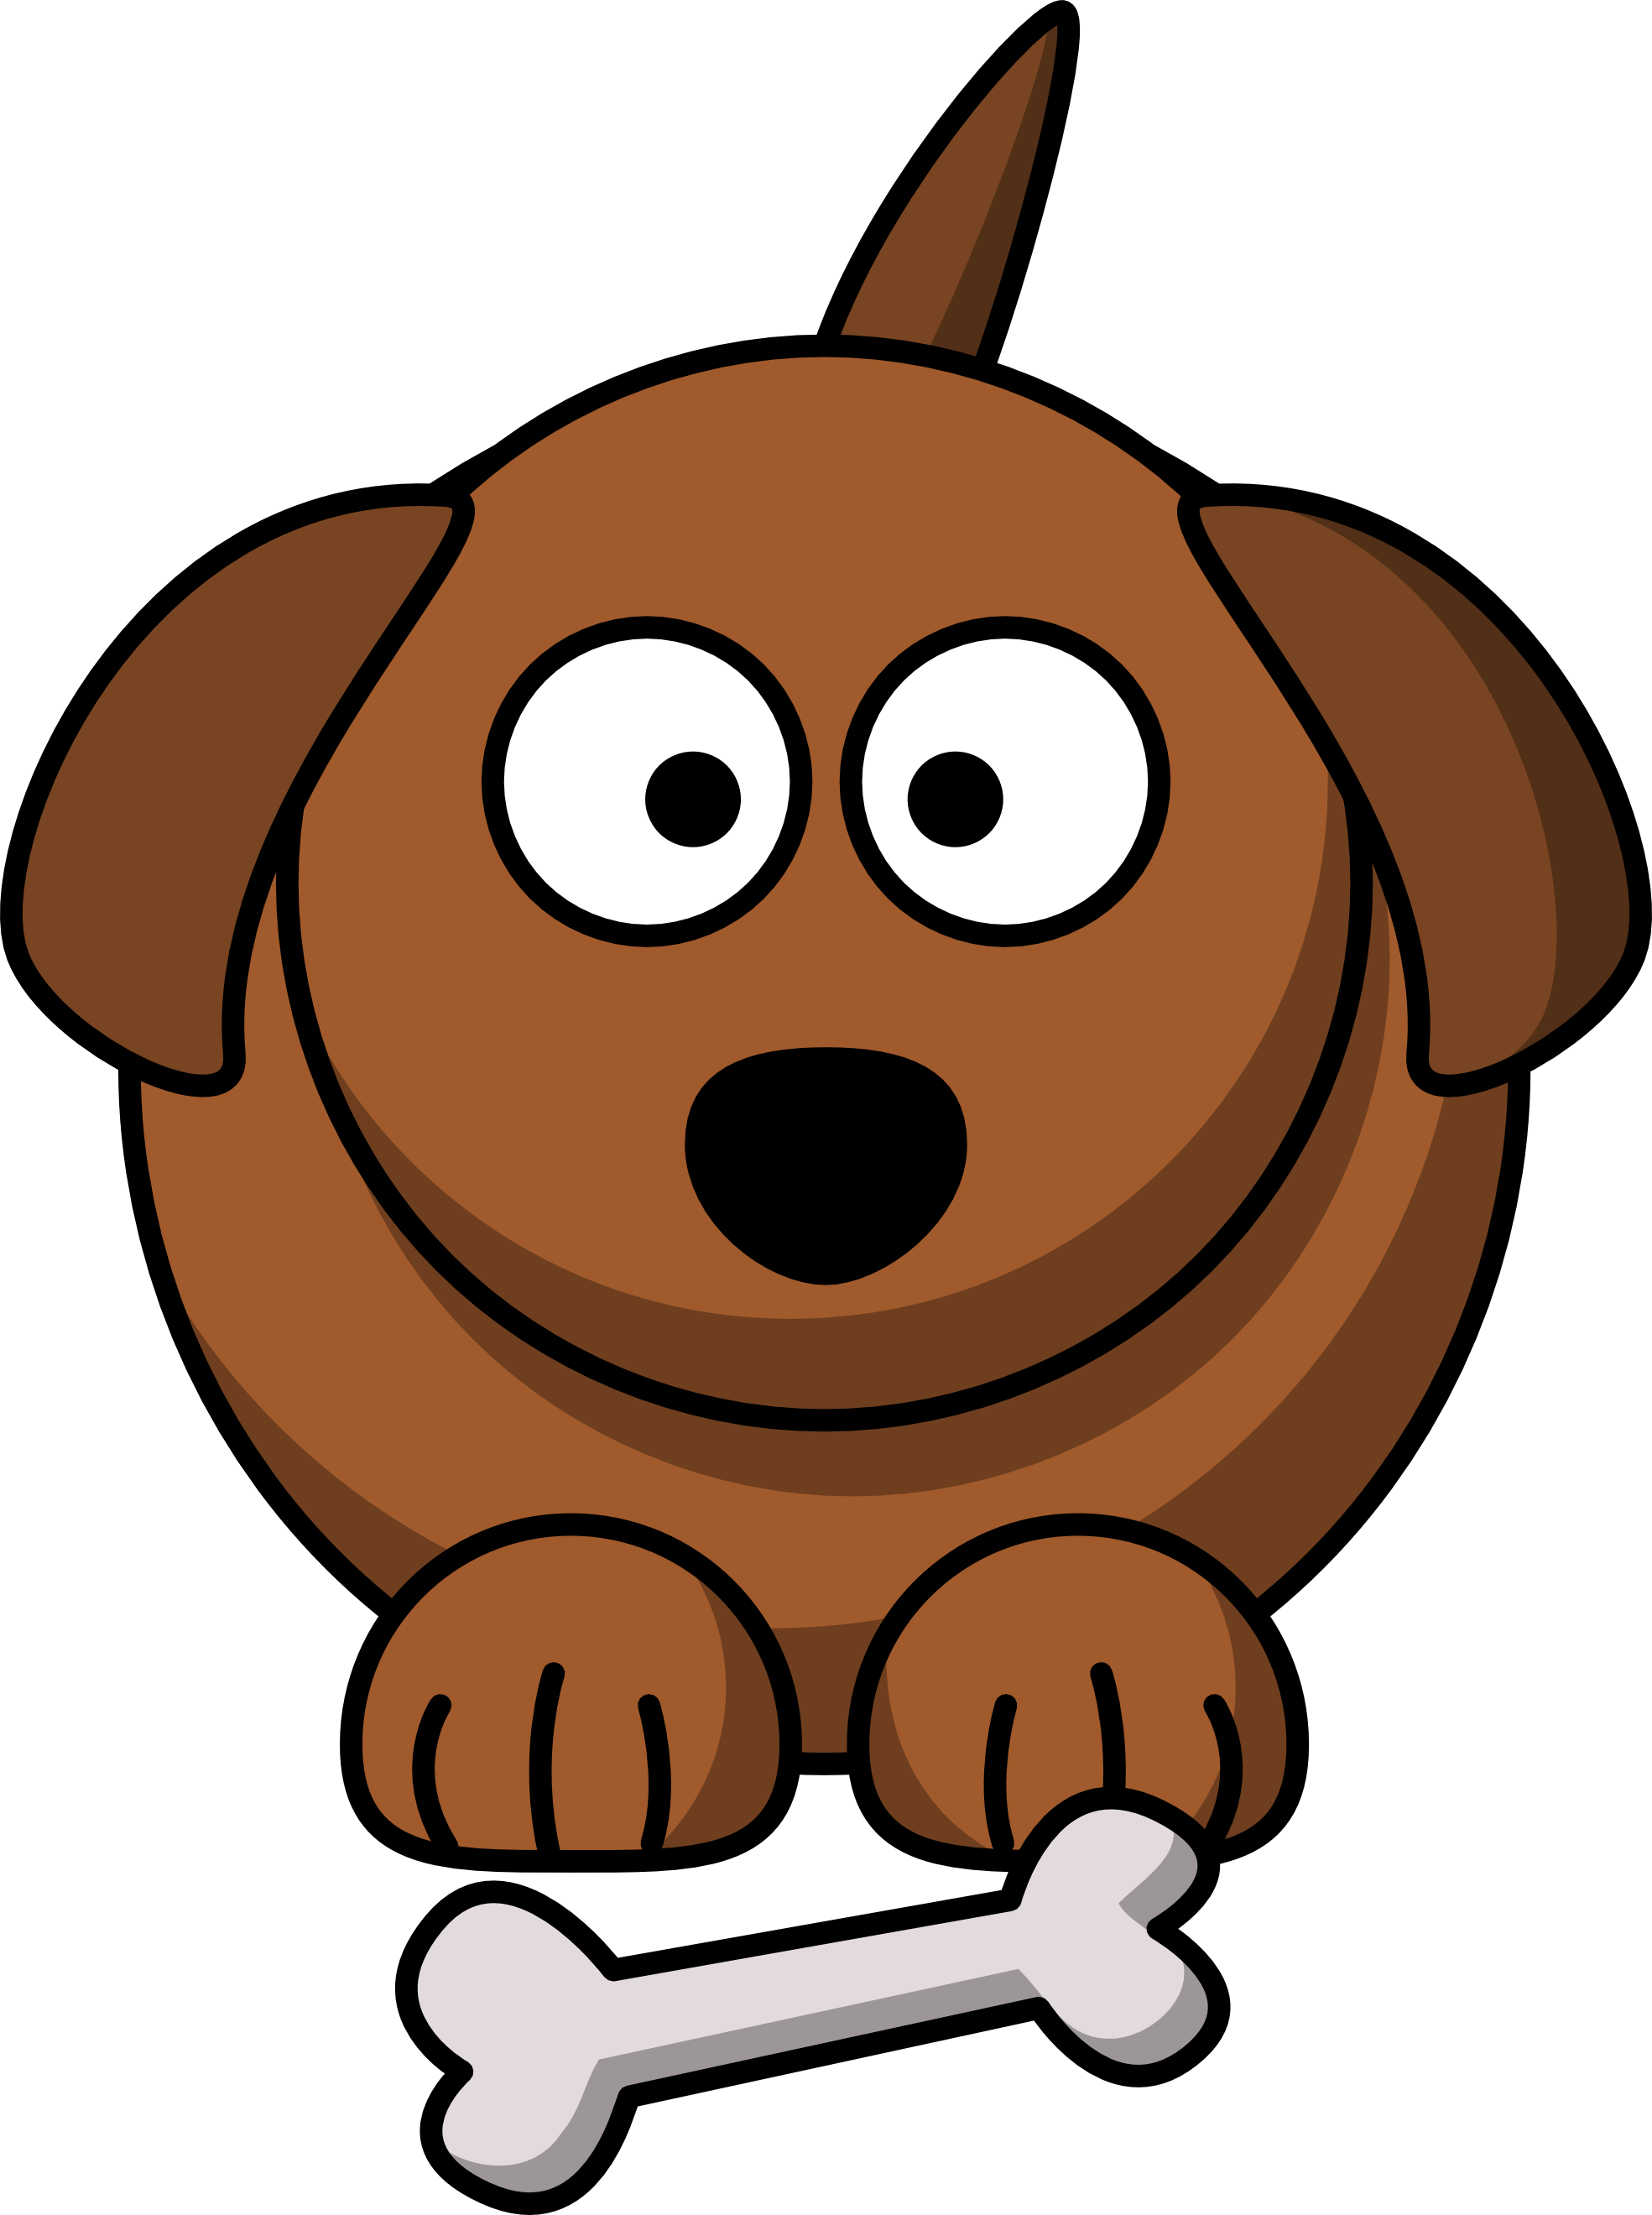 Cute Dog And Cat Clip Art | Clipart library - Free Clipart Images